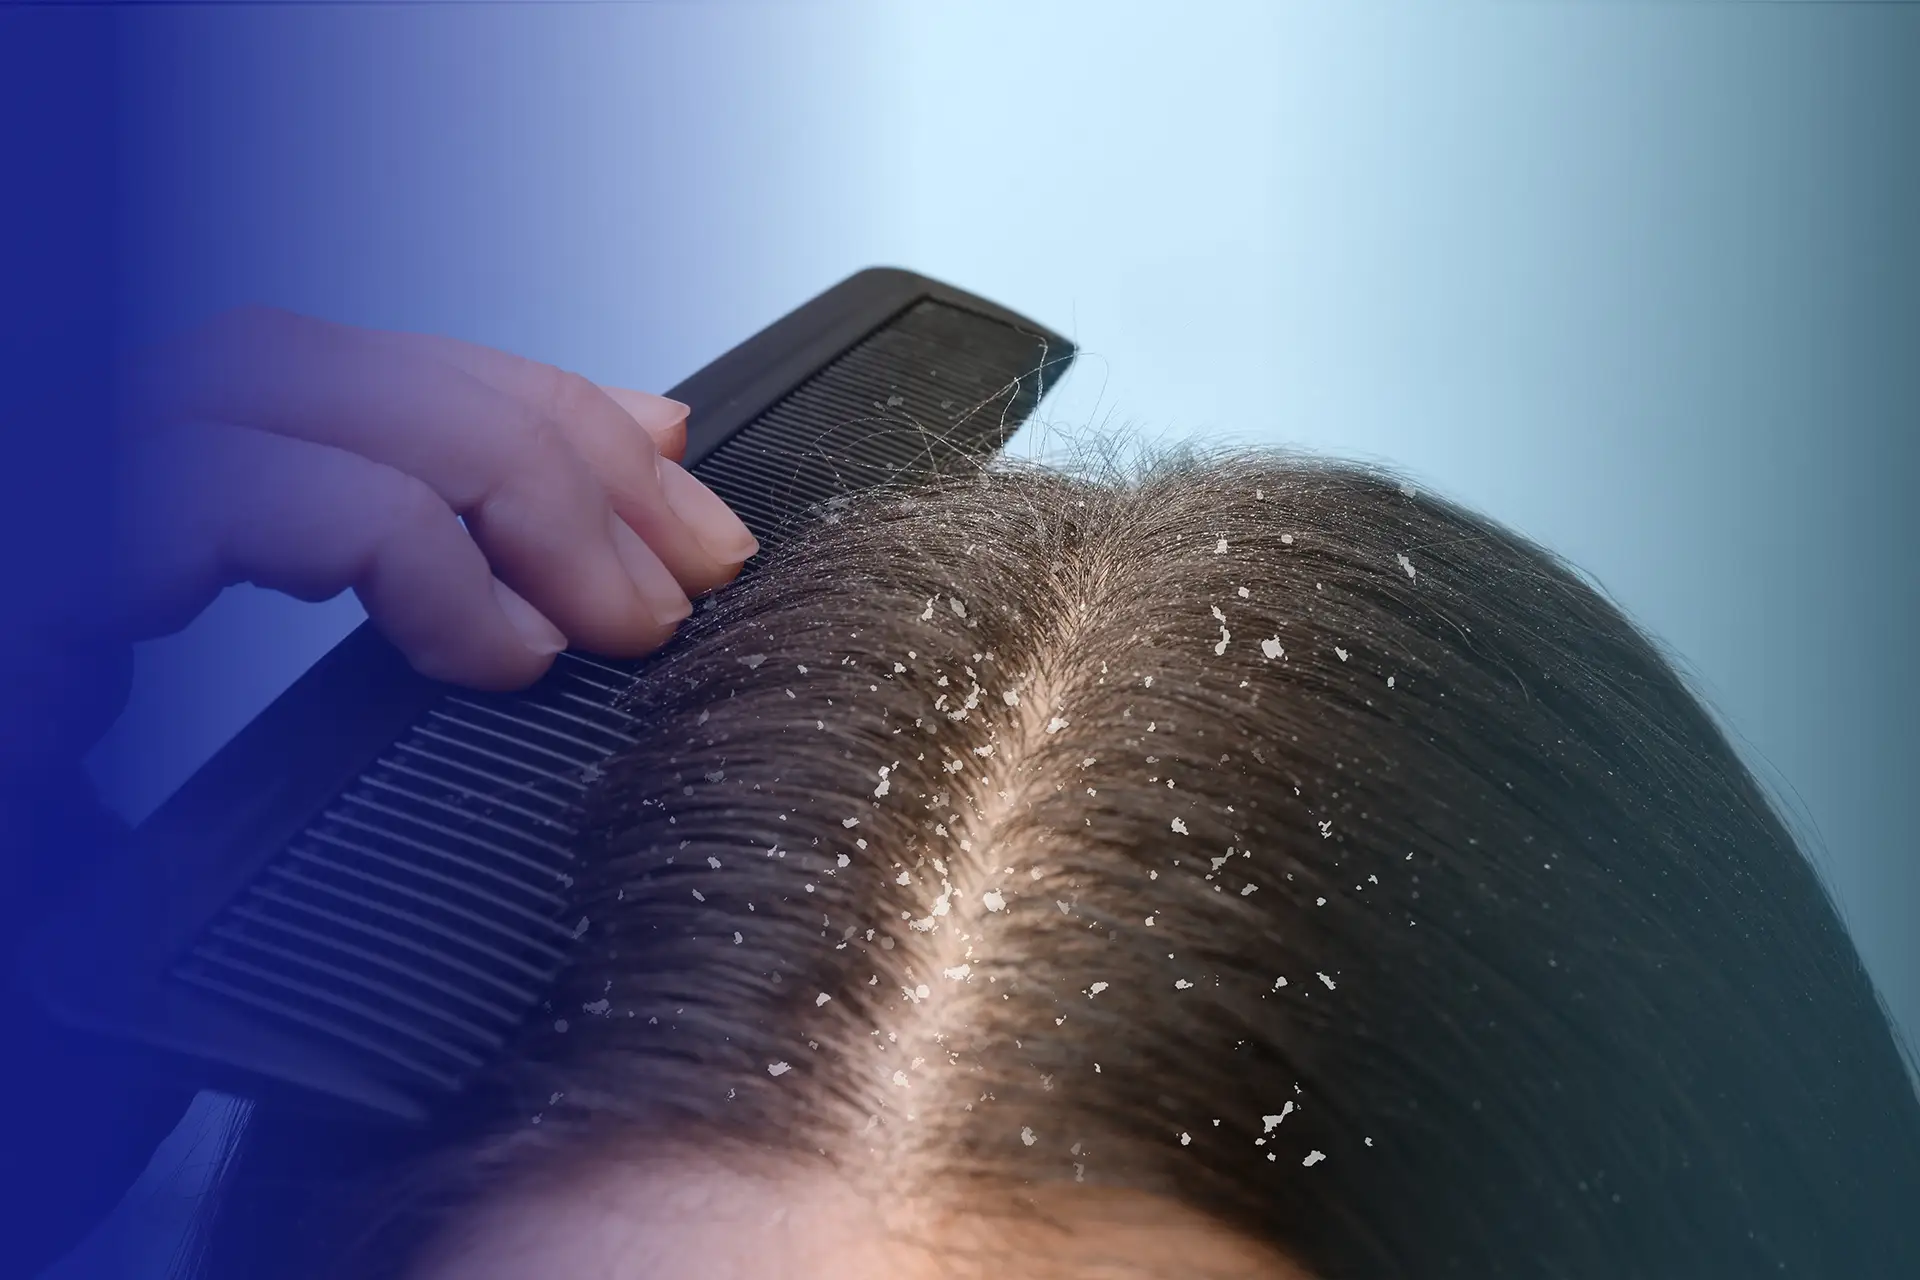 Hair loss treatment Antifungal medicine could really work if you have  ringworm  Expresscouk